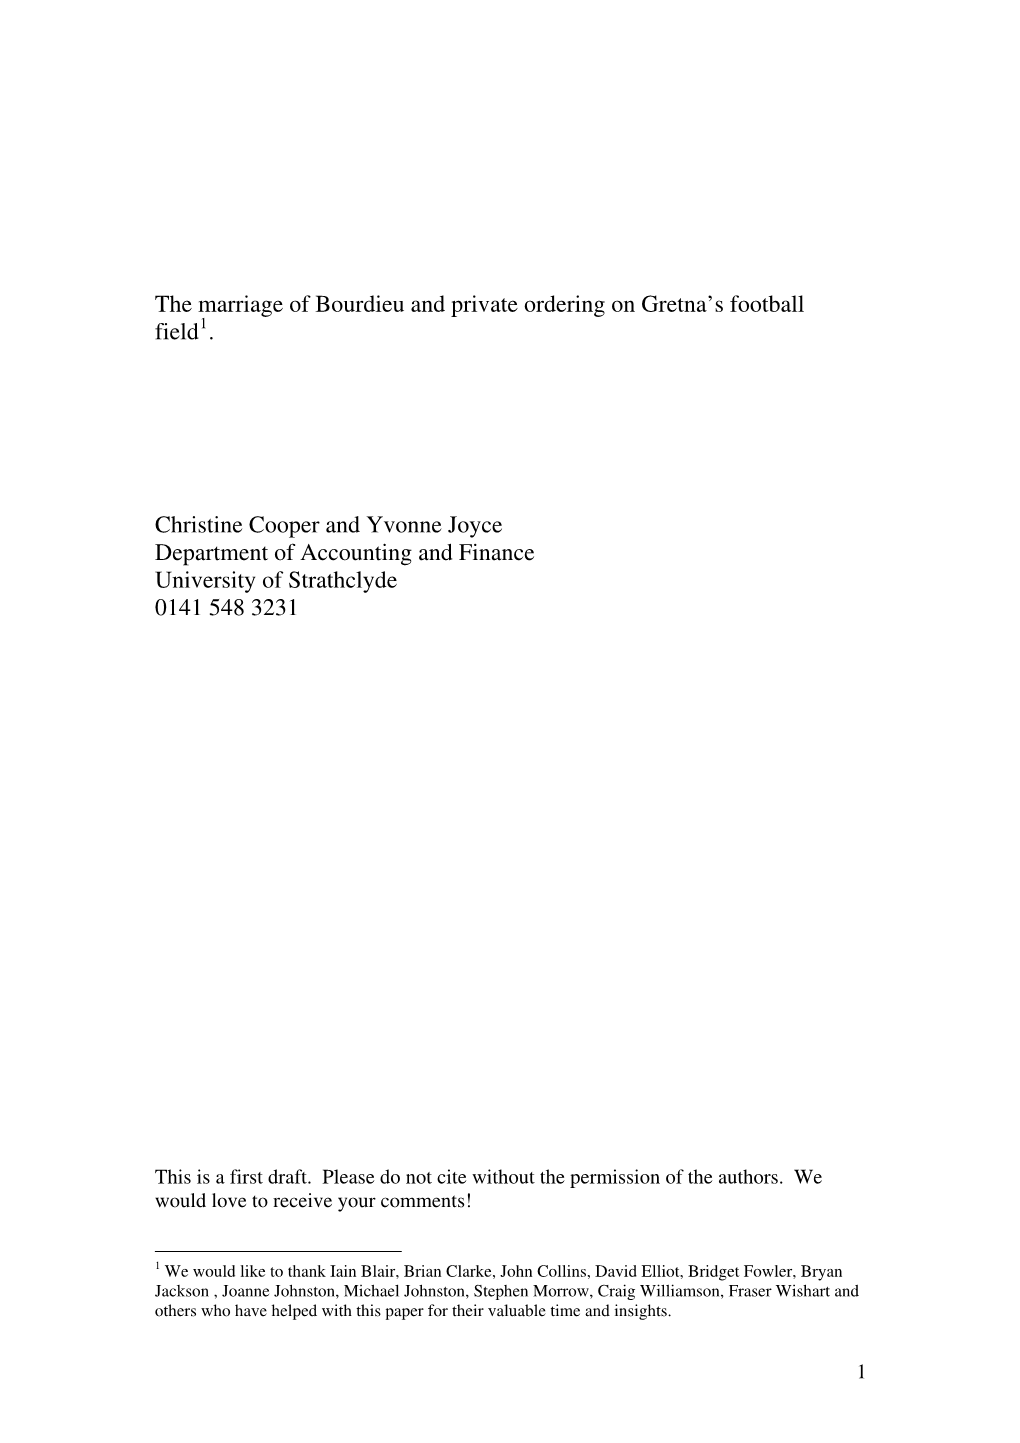 The Marriage of Bourdieu and Private Ordering on Gretna's Football Field . Christine Cooper and Yvonne Joyce Department Of